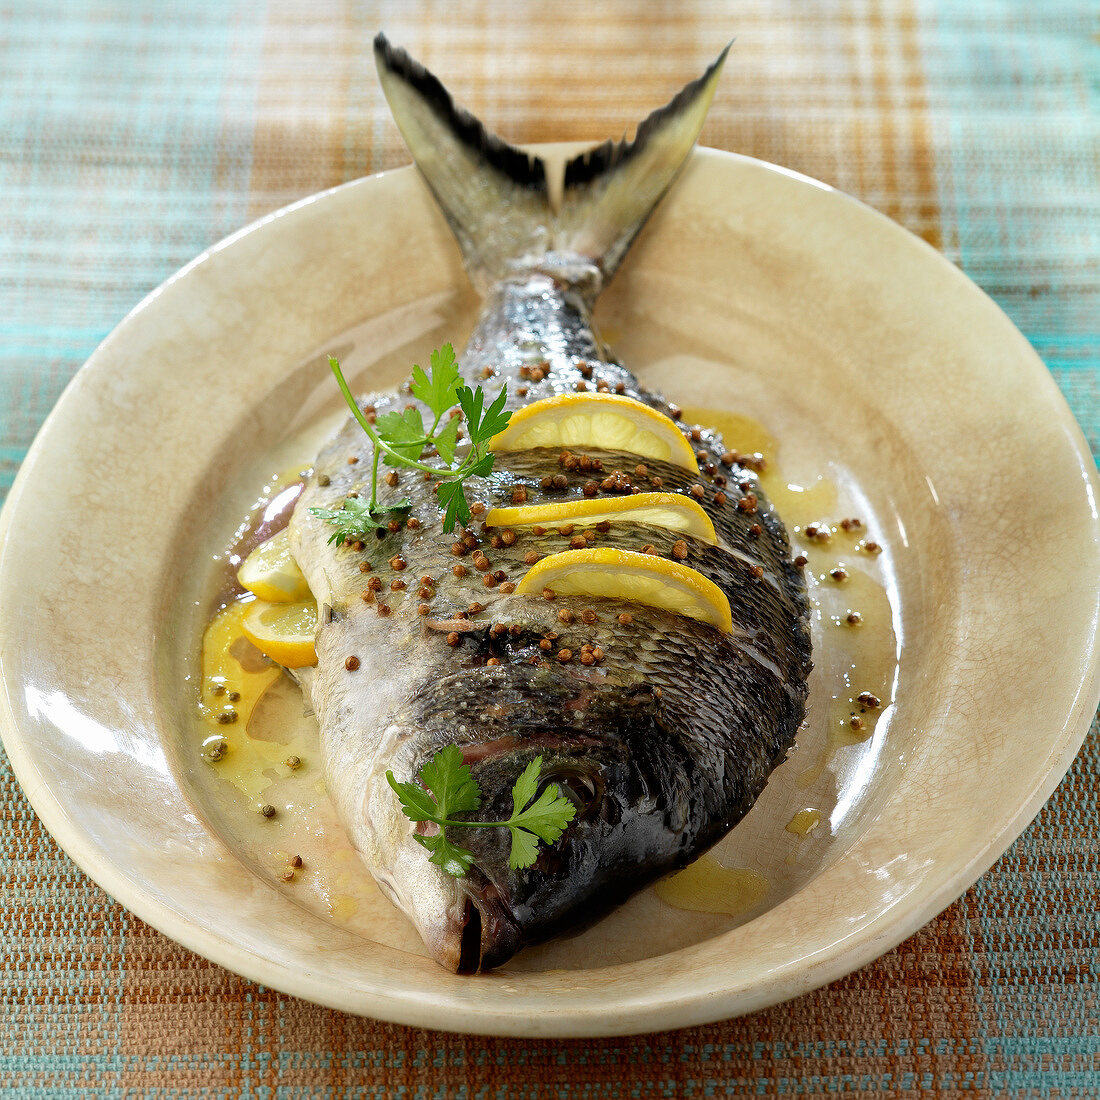 Oven-baked sea bream with lemon and coriander seeds